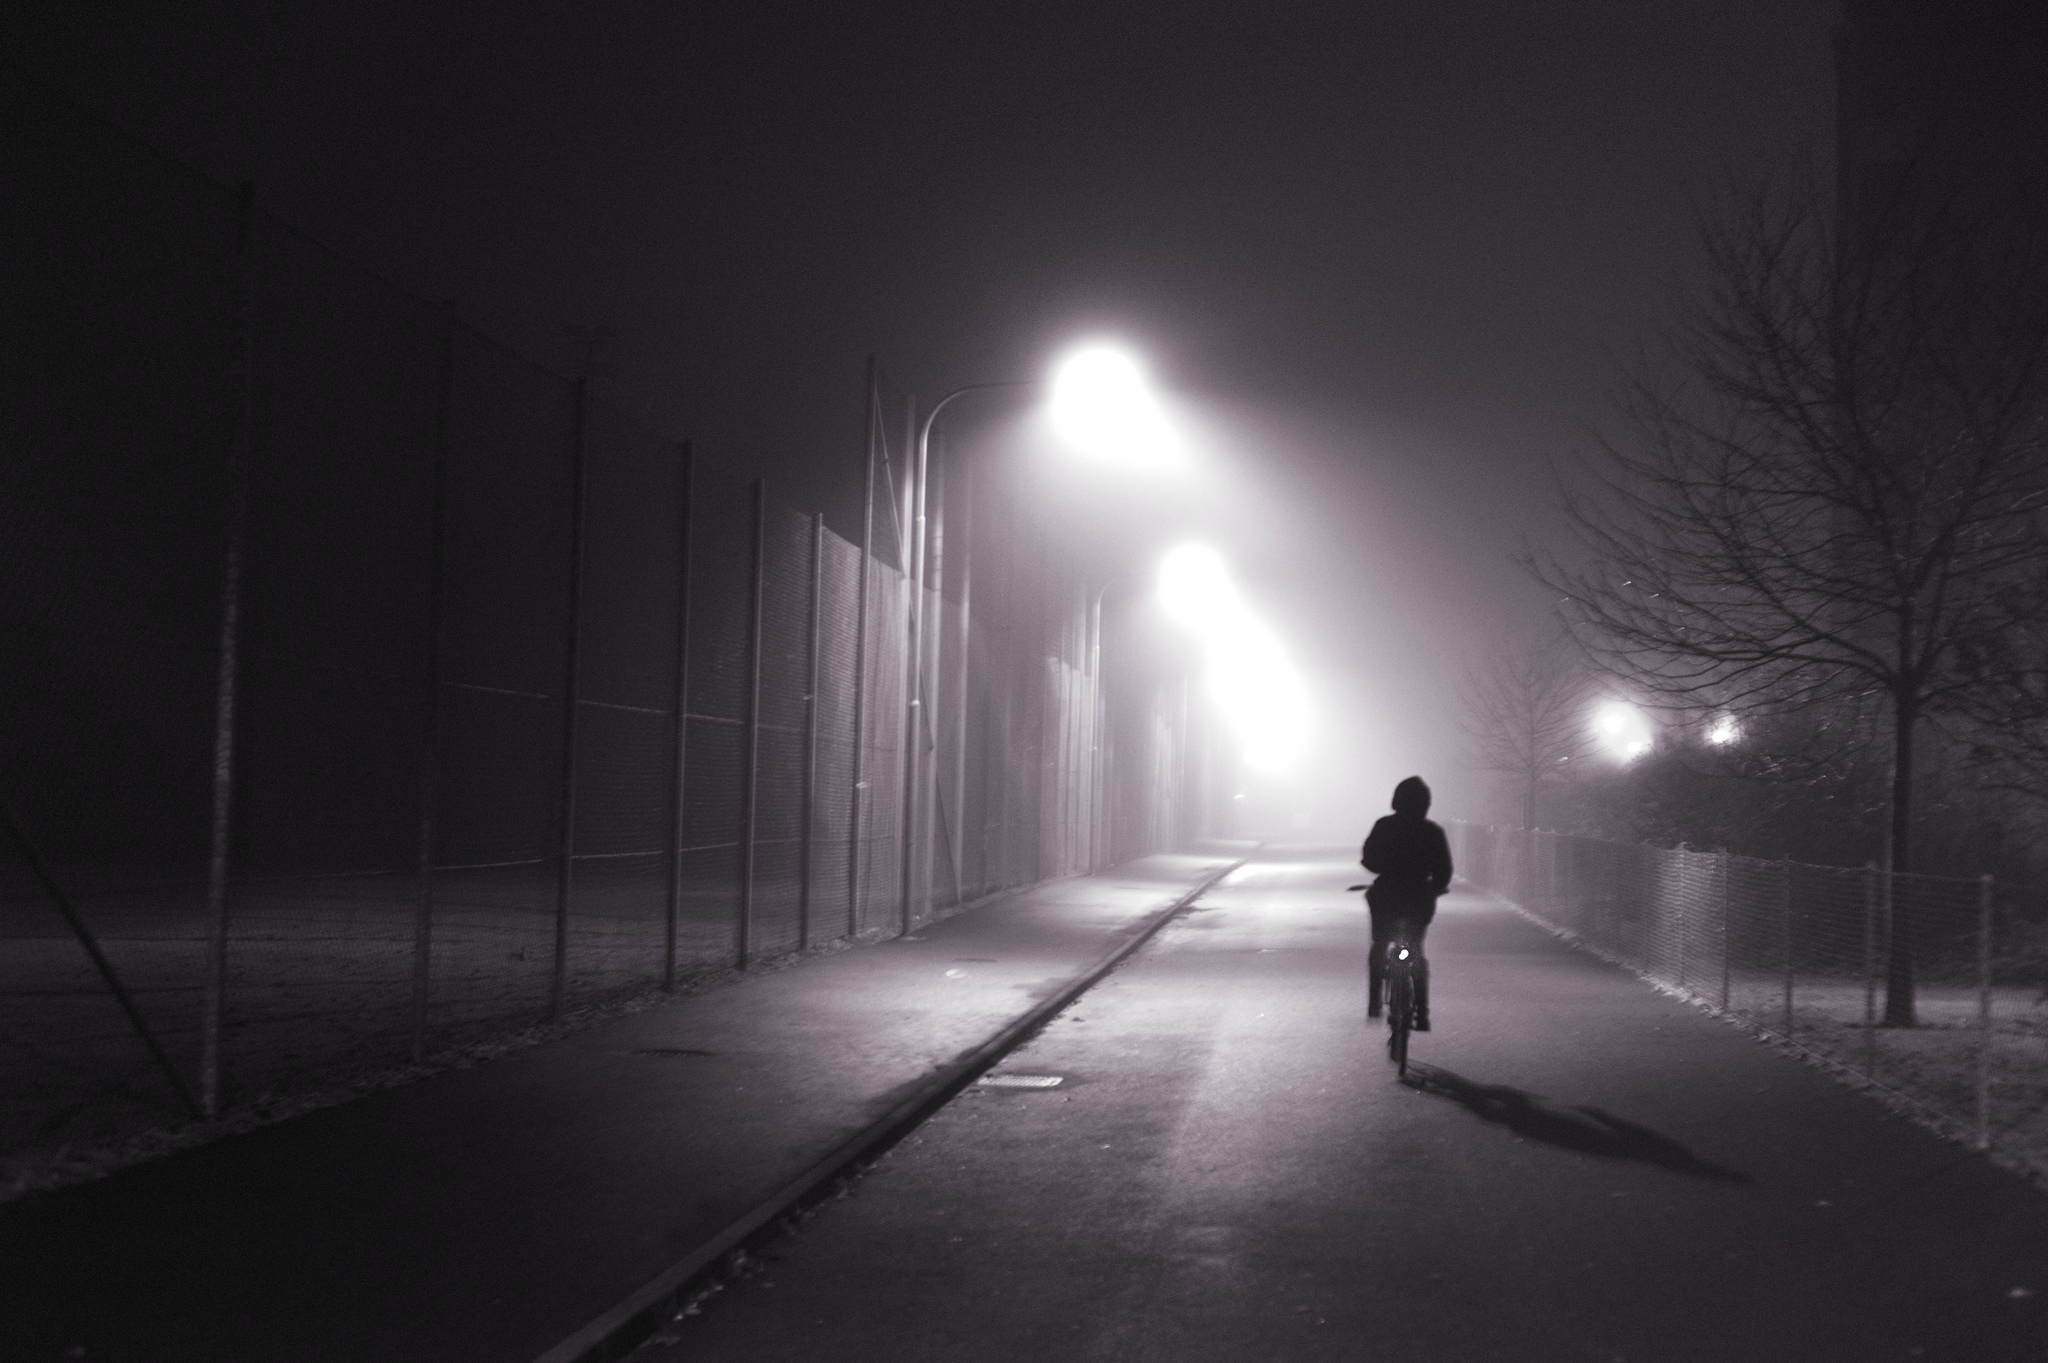 13 People Share The Scariest Thing That’s Ever Happened To Them When